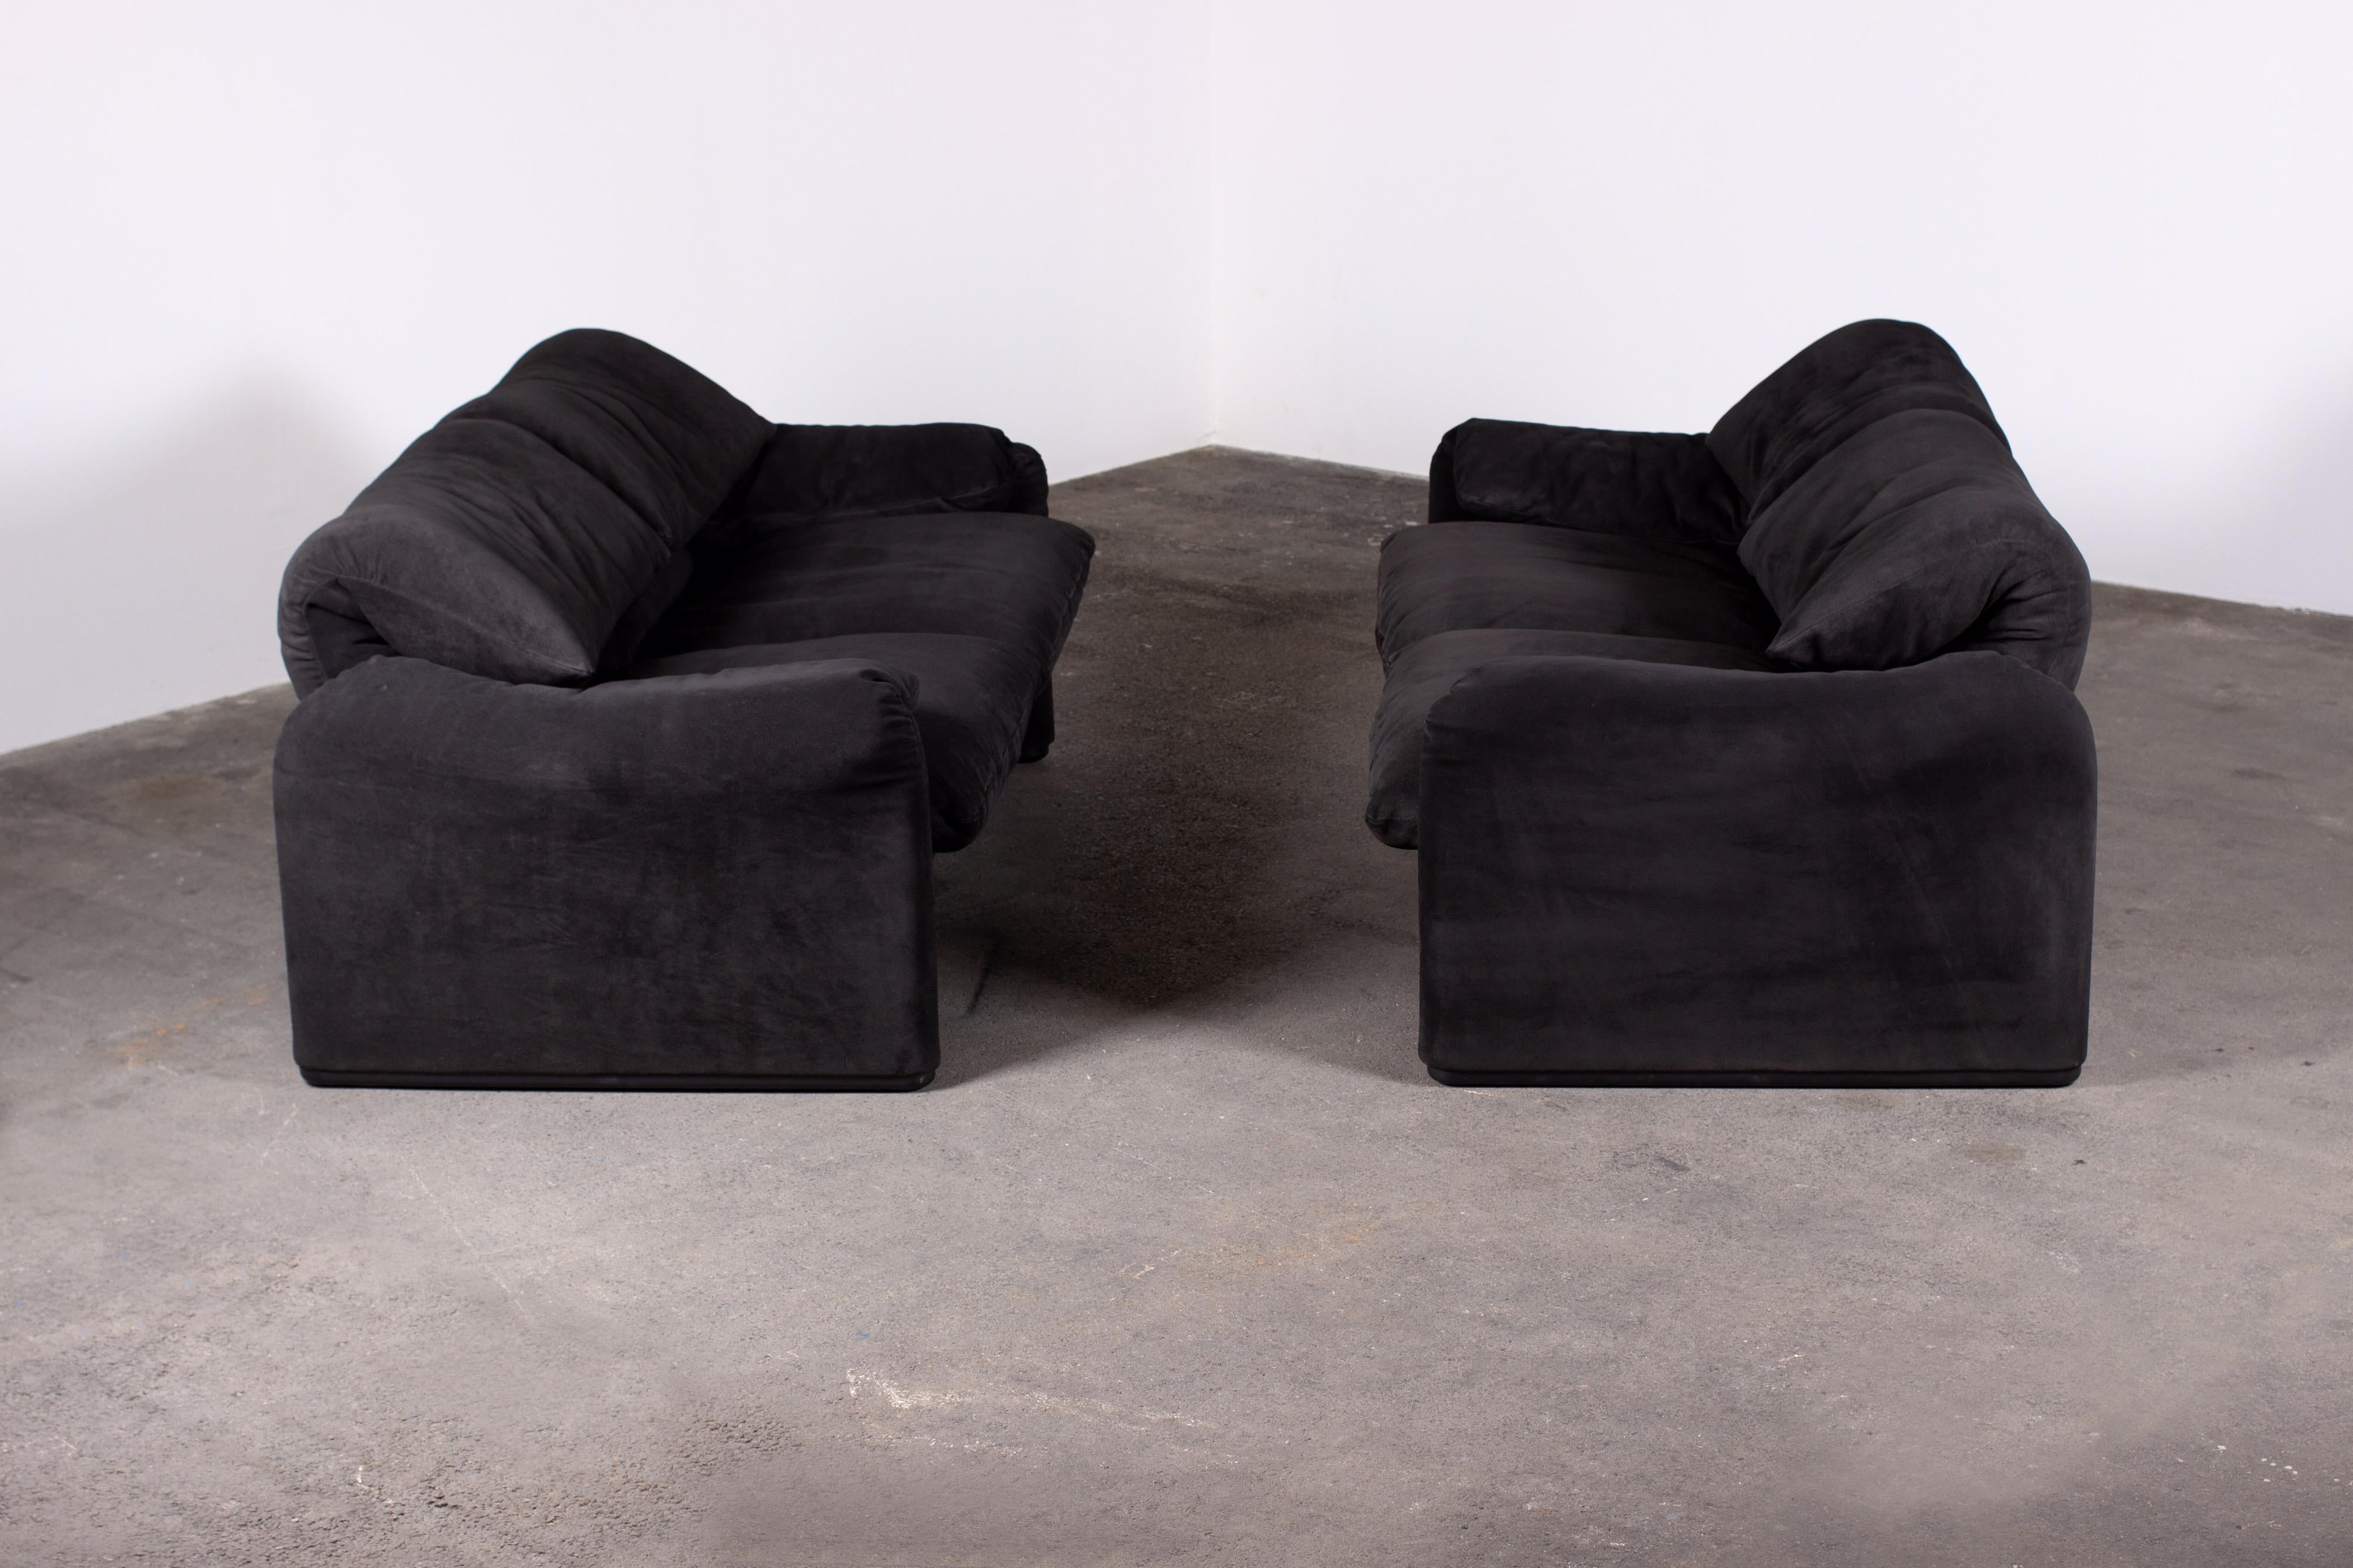 Mid-Century Modern Pair of Black Suede 2-Seater Maralunga Sofas by Vico Magistretti for Cassina